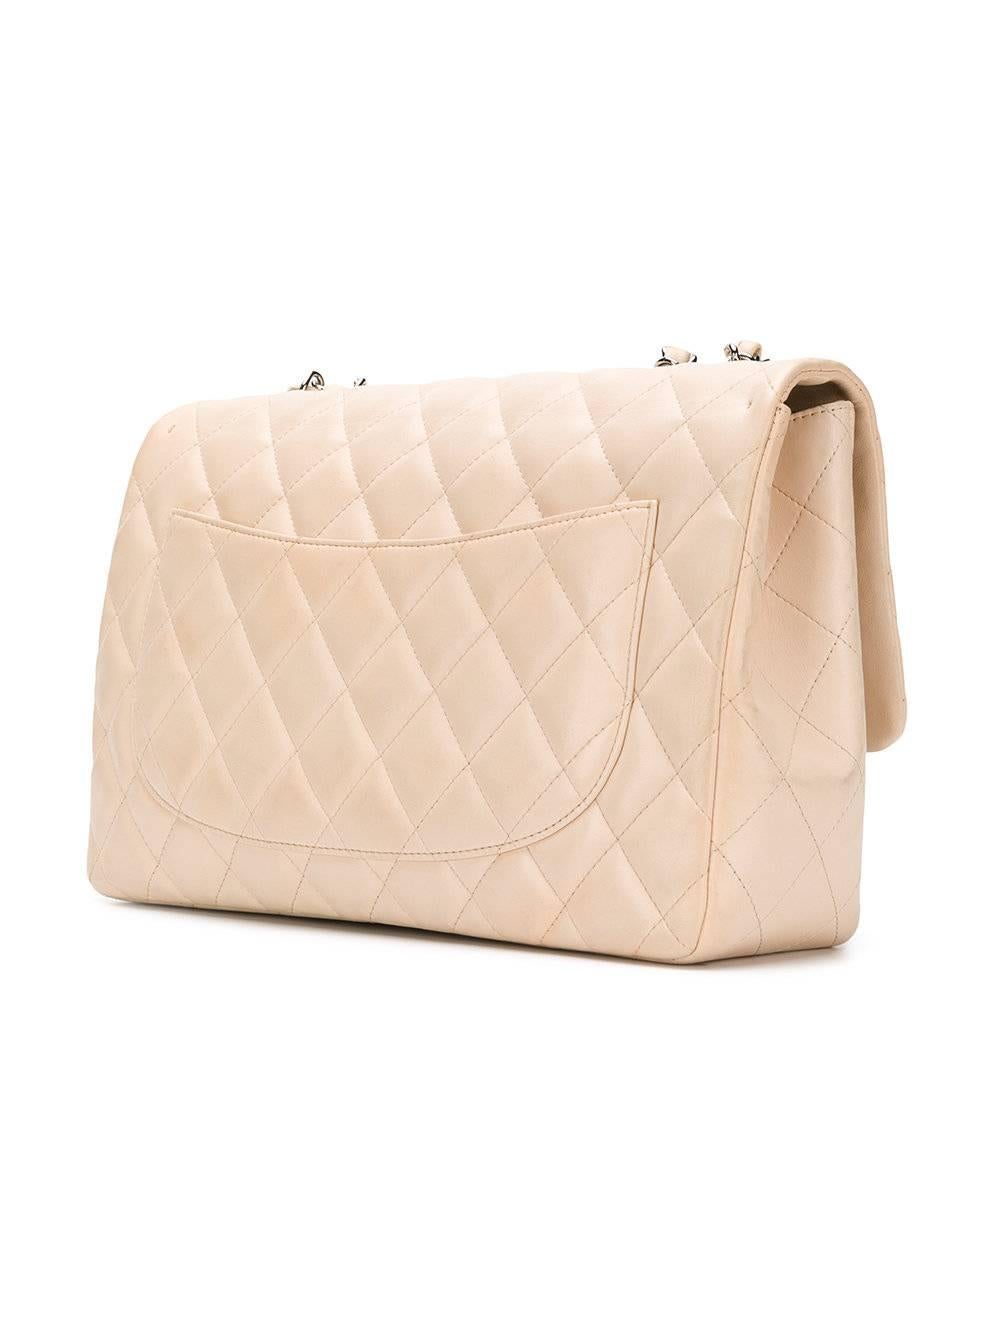 Crafted from luxurious lambskin leather, this timeless Chanel flap bag features a diamond quilt finish and a versatile leather shoulder strap chain that can be worn on the shoulder or lengthened to wear with a longer drop. The main foldover top is